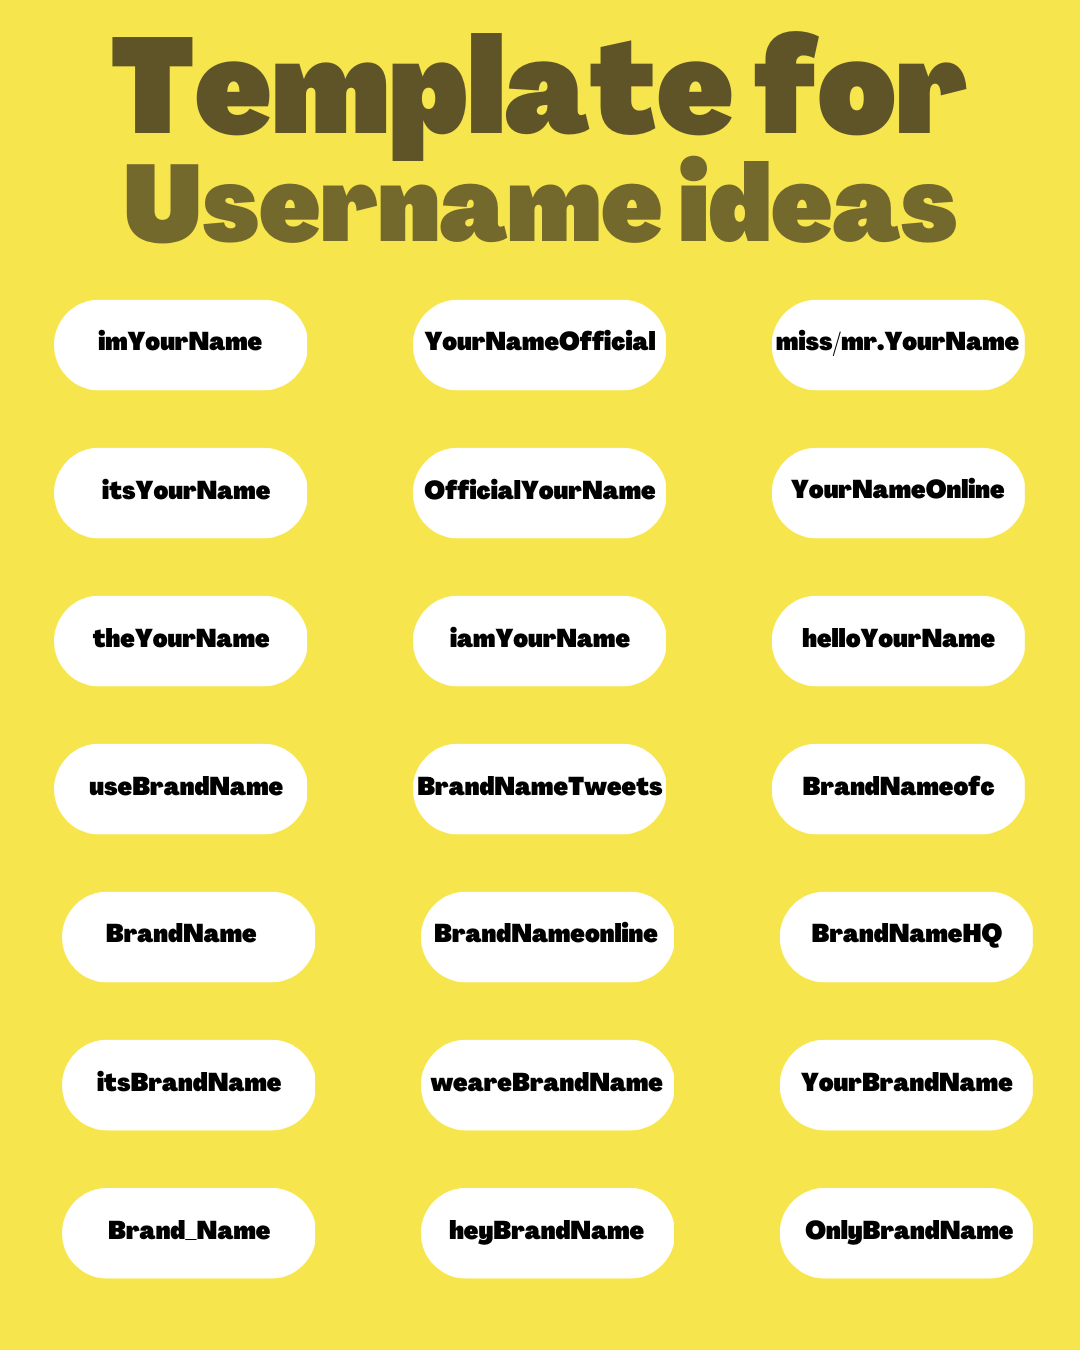 Remote.tools shares a template to help you come up with usernames for personal/brand social handles.